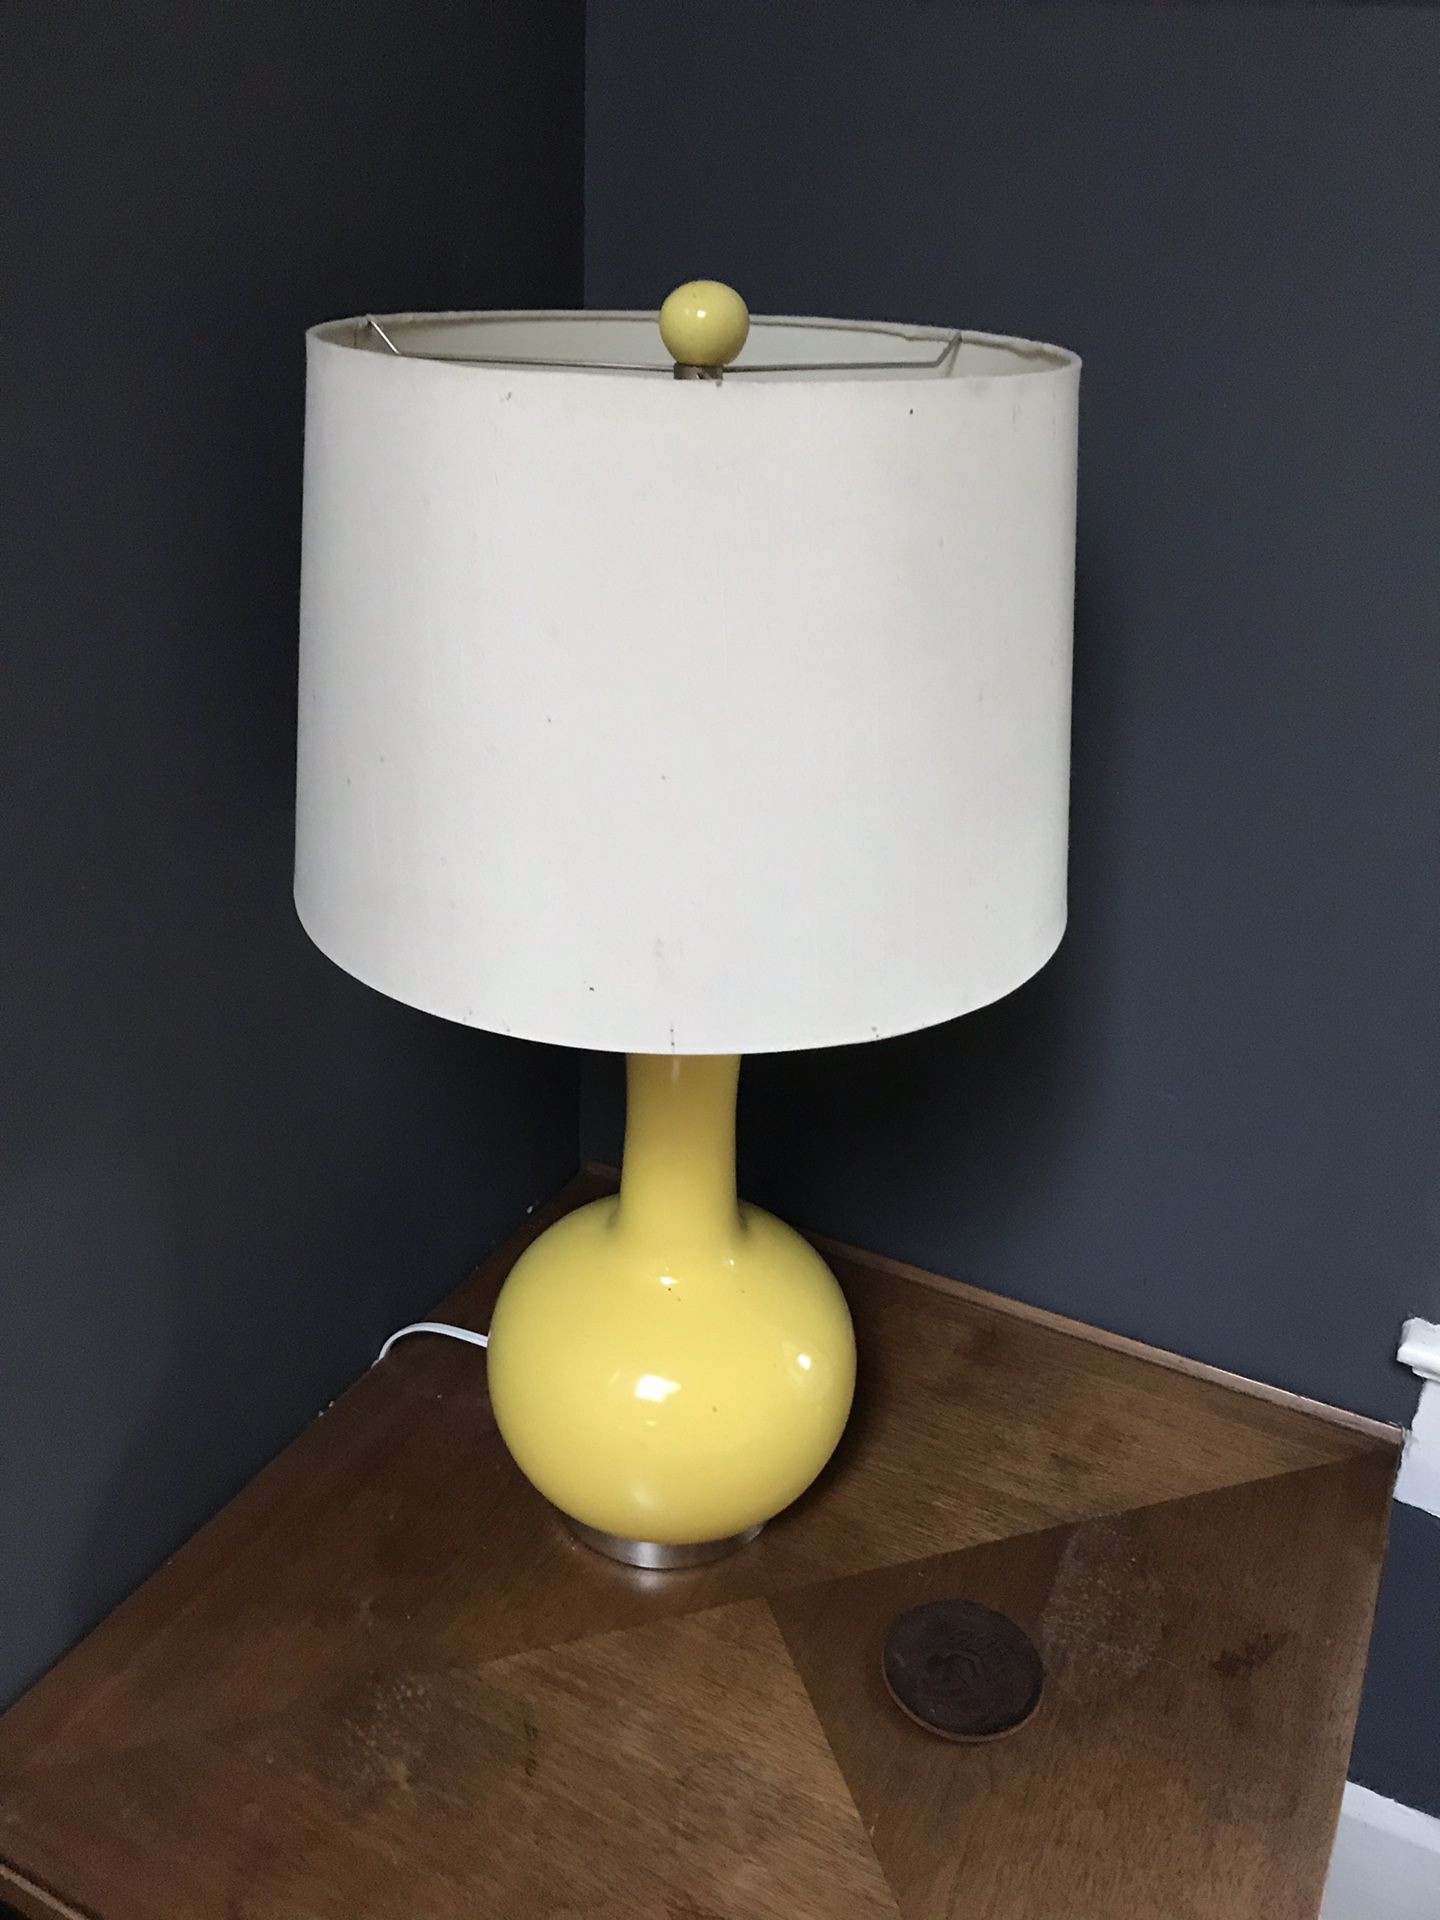 Vintage yellow lamp with white shade